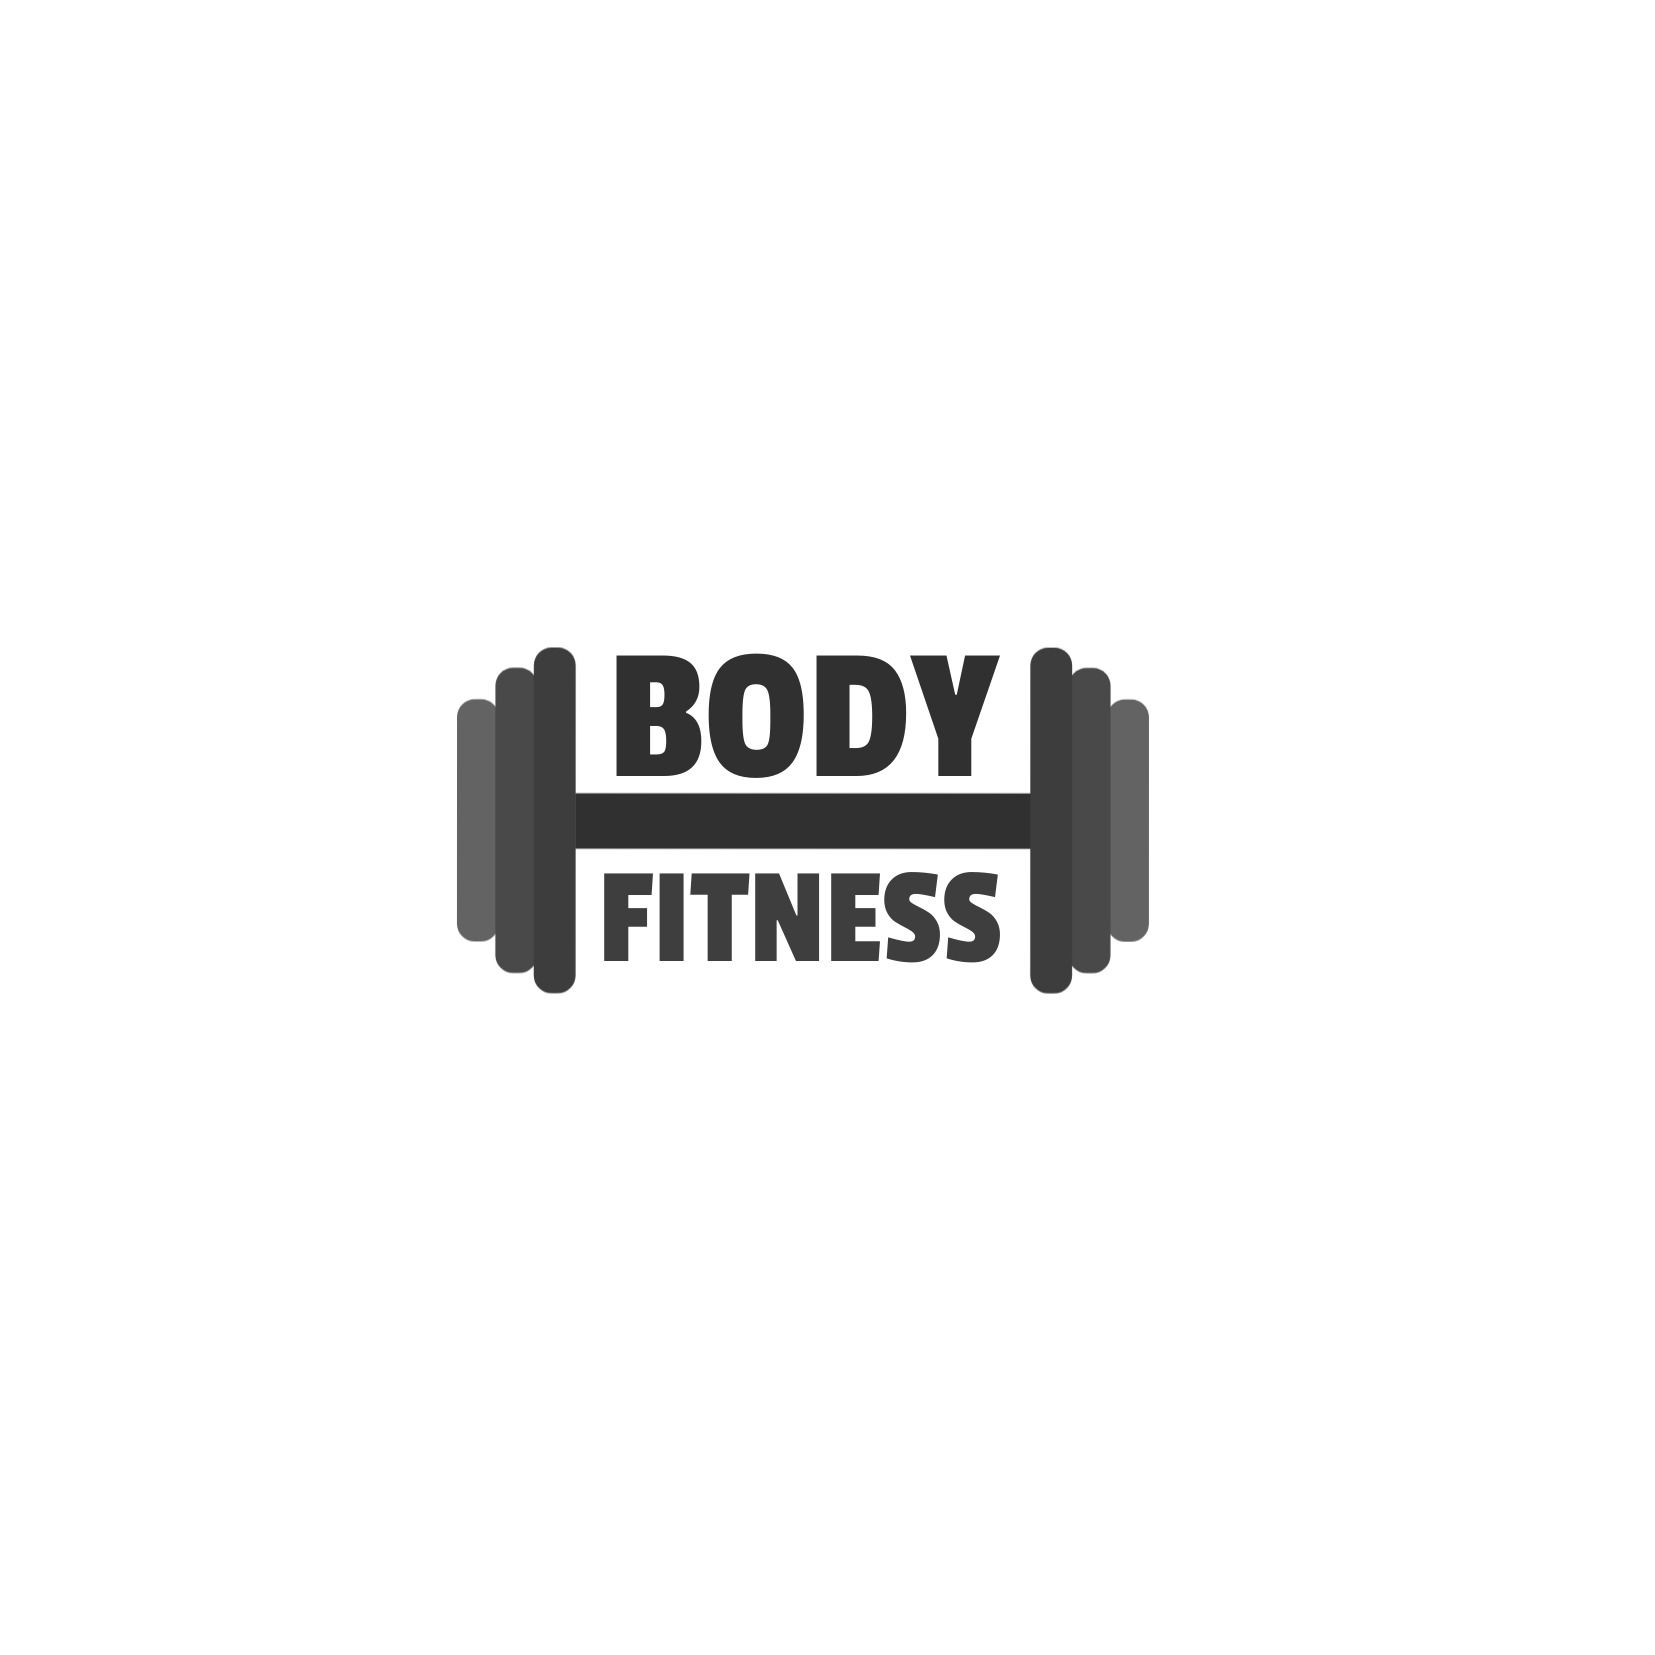 Fitness center logo with dumbbell on a white background - Passion One is one of the best fonts for a fitness logo - Image